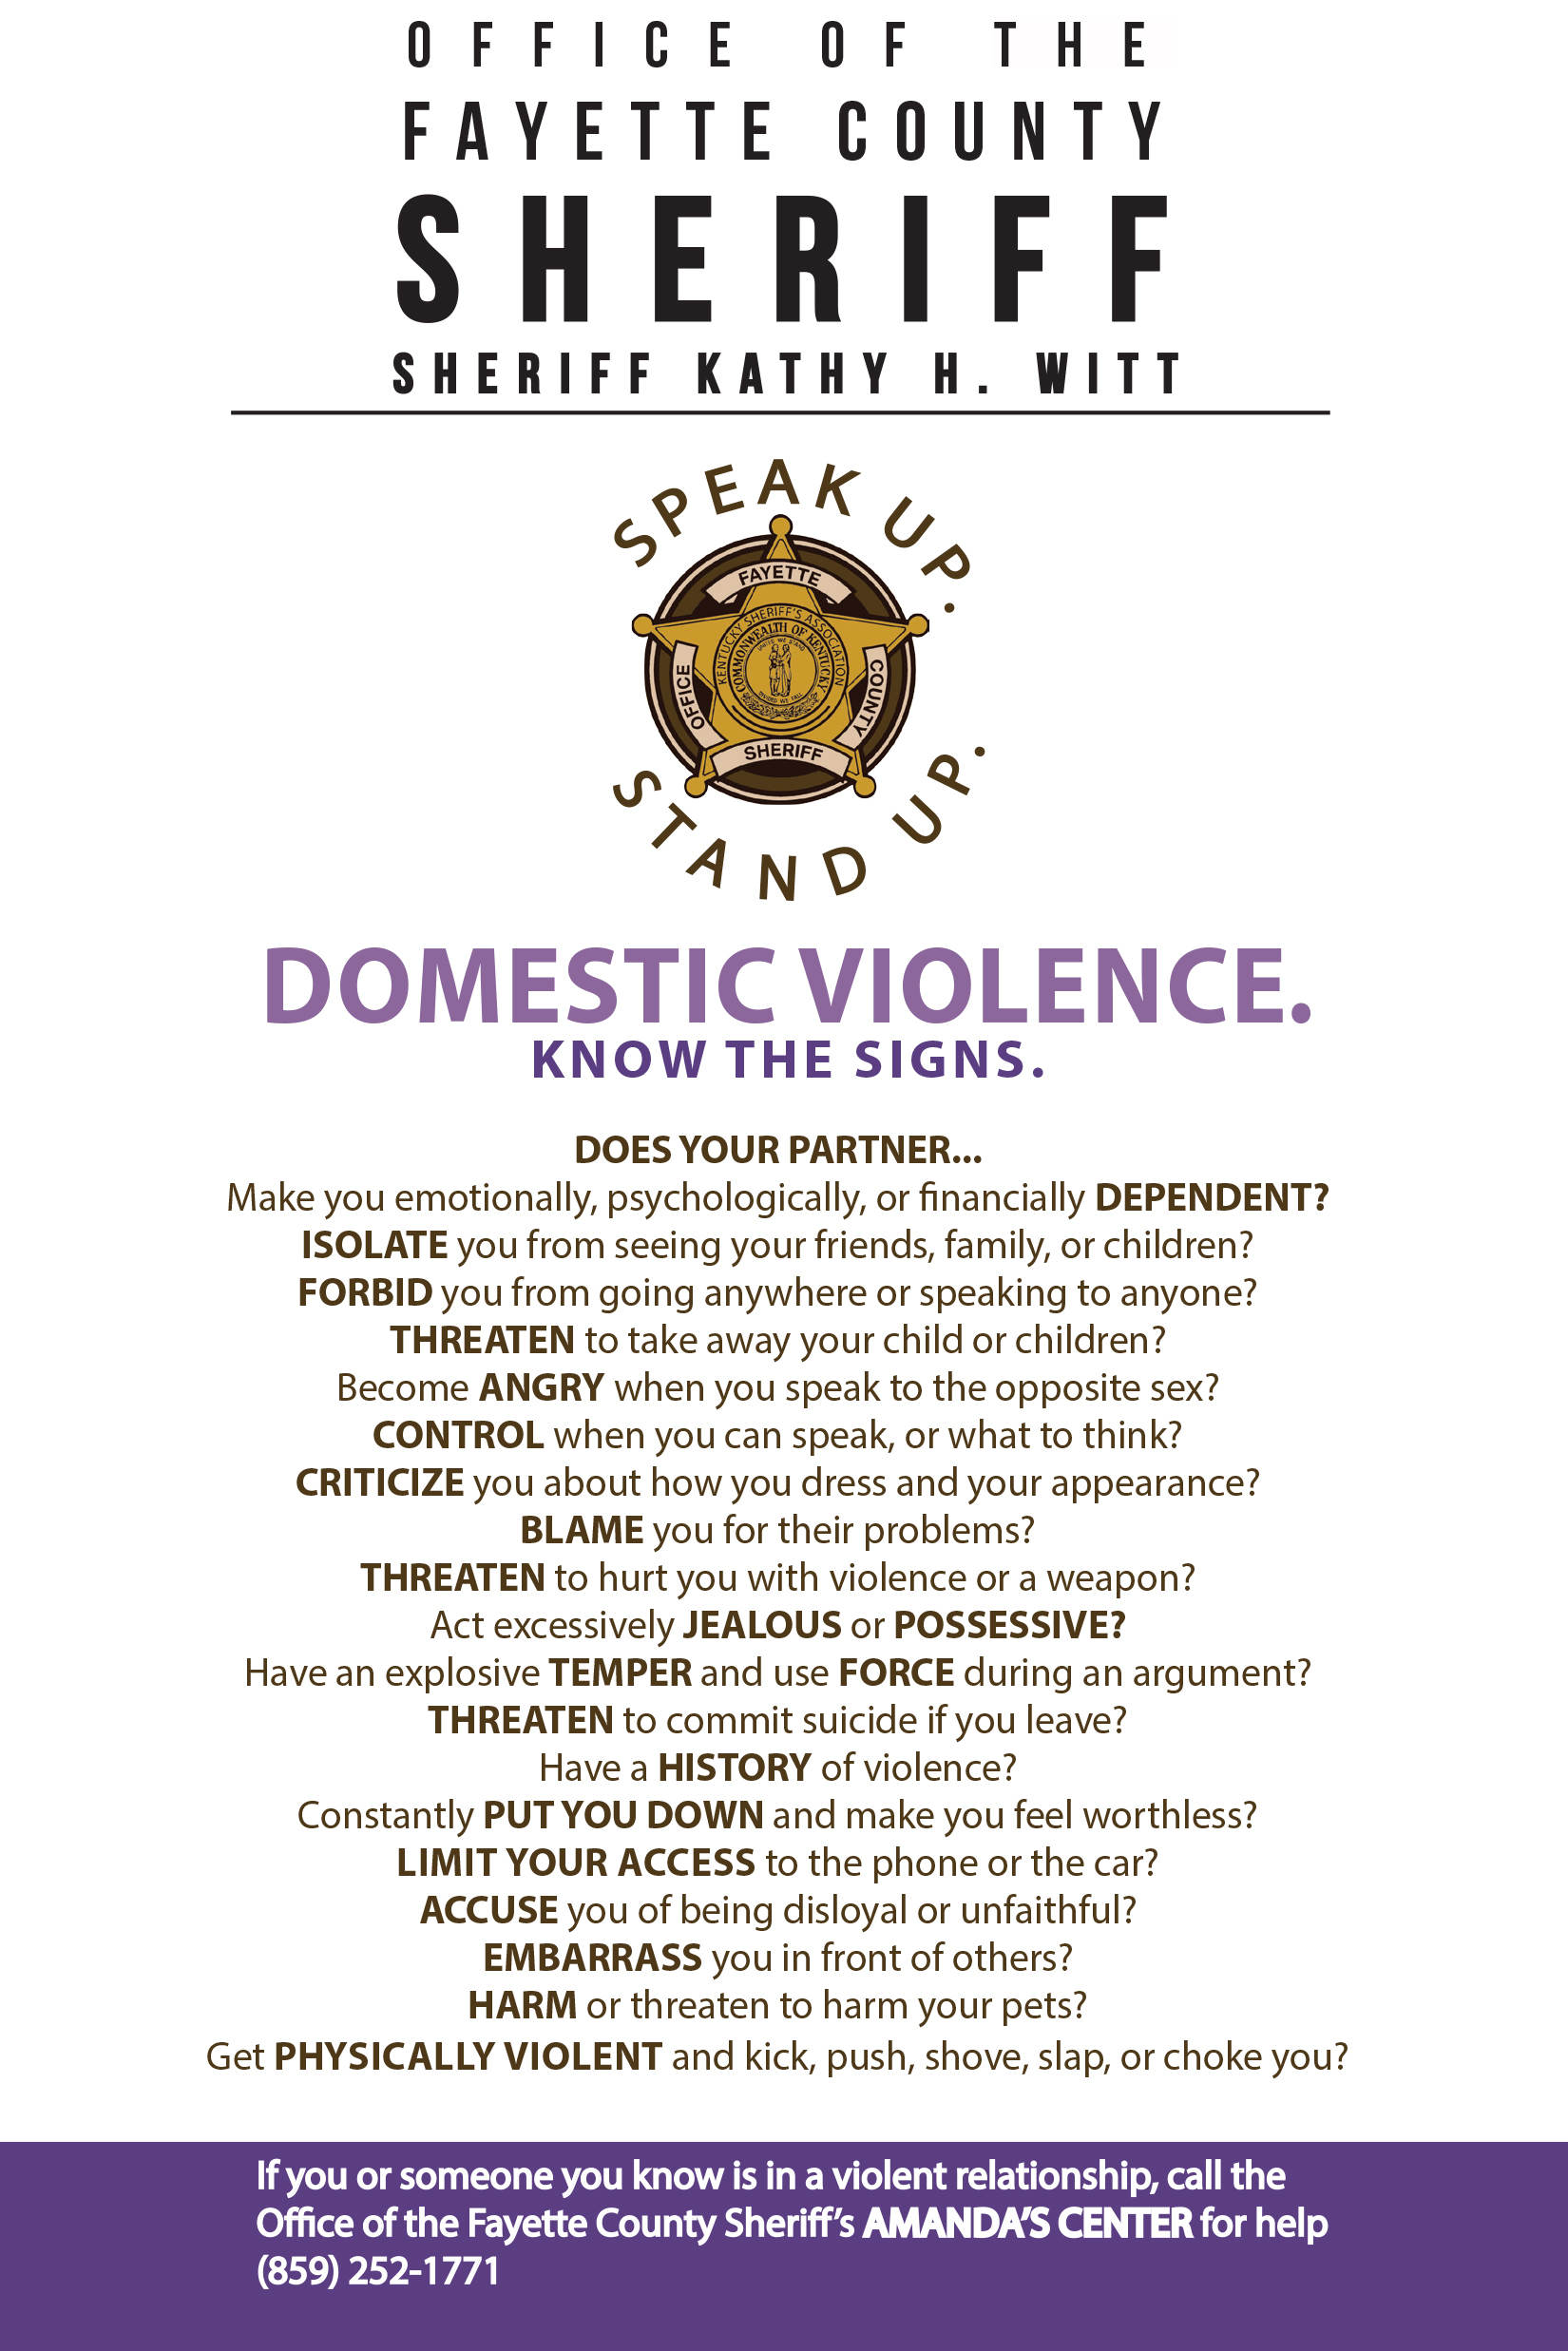 Domestic violence. Know the signs.